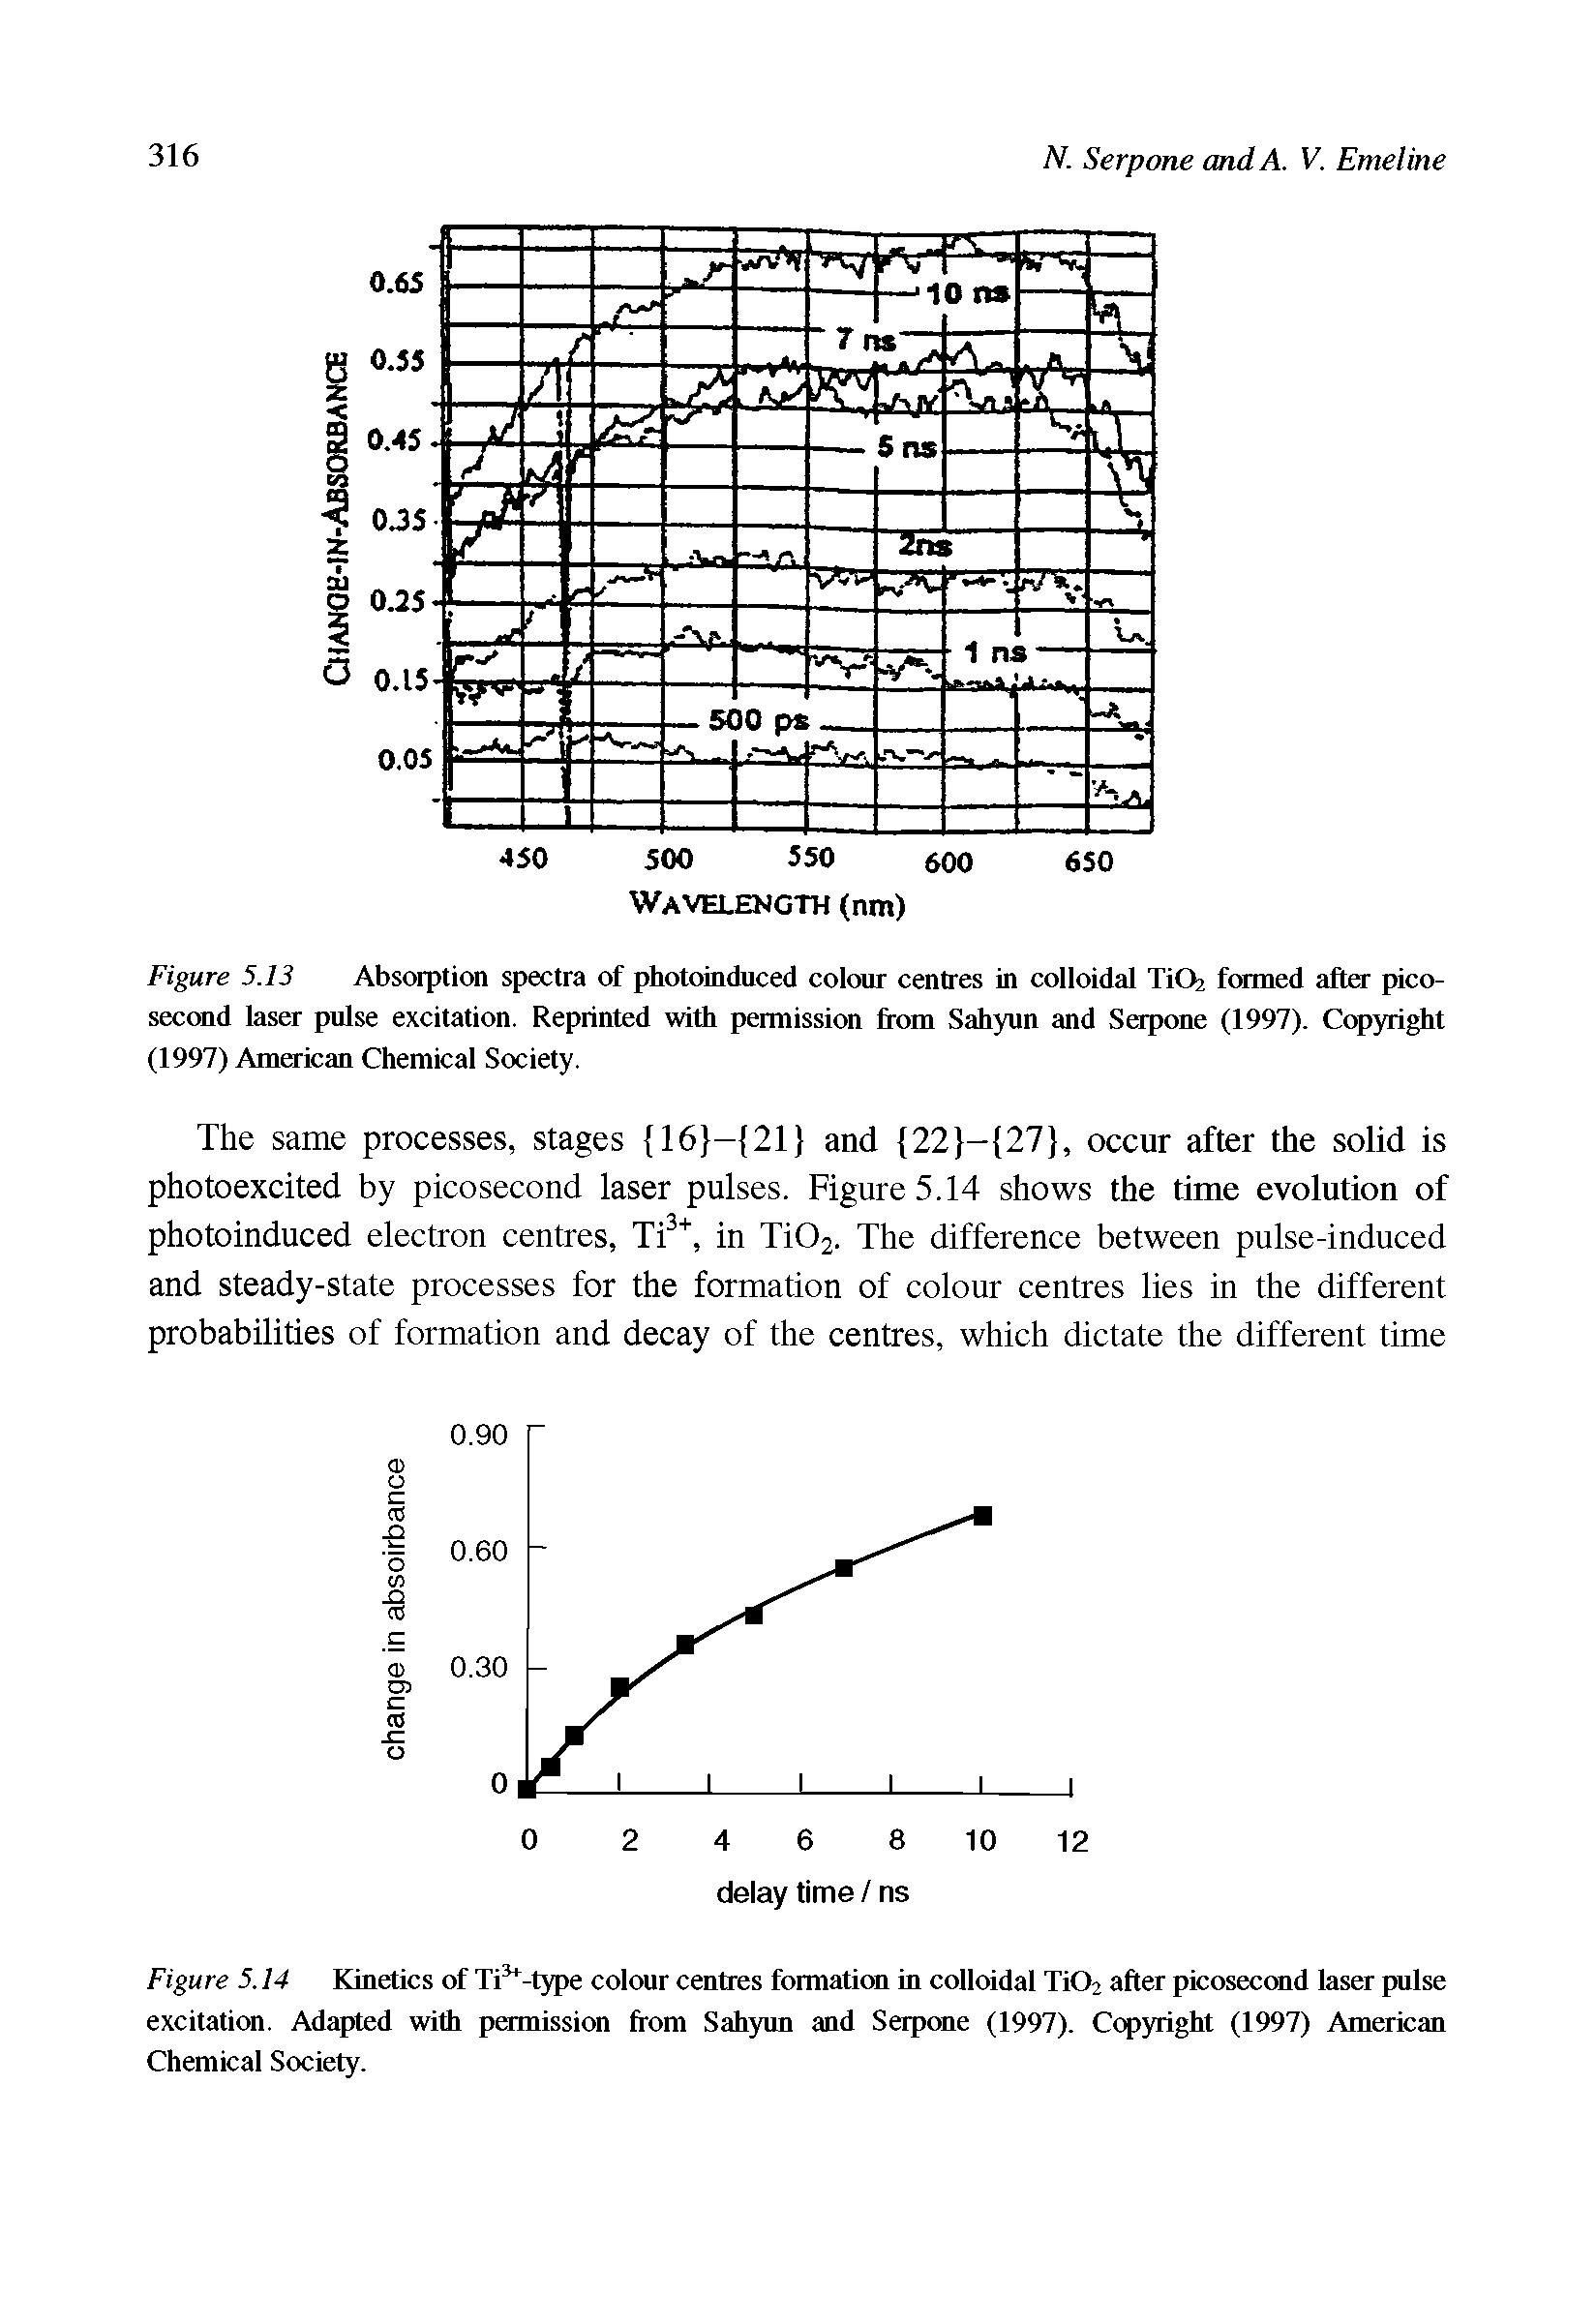 Figure 5.13 Absorption spectra of photoinduced colour centres in colloidal TiOz formed after picosecond laser pulse excitation. Reprinted with permission from Sahyun and Serpone (1997). Copyright (1997) American Chemical Society.